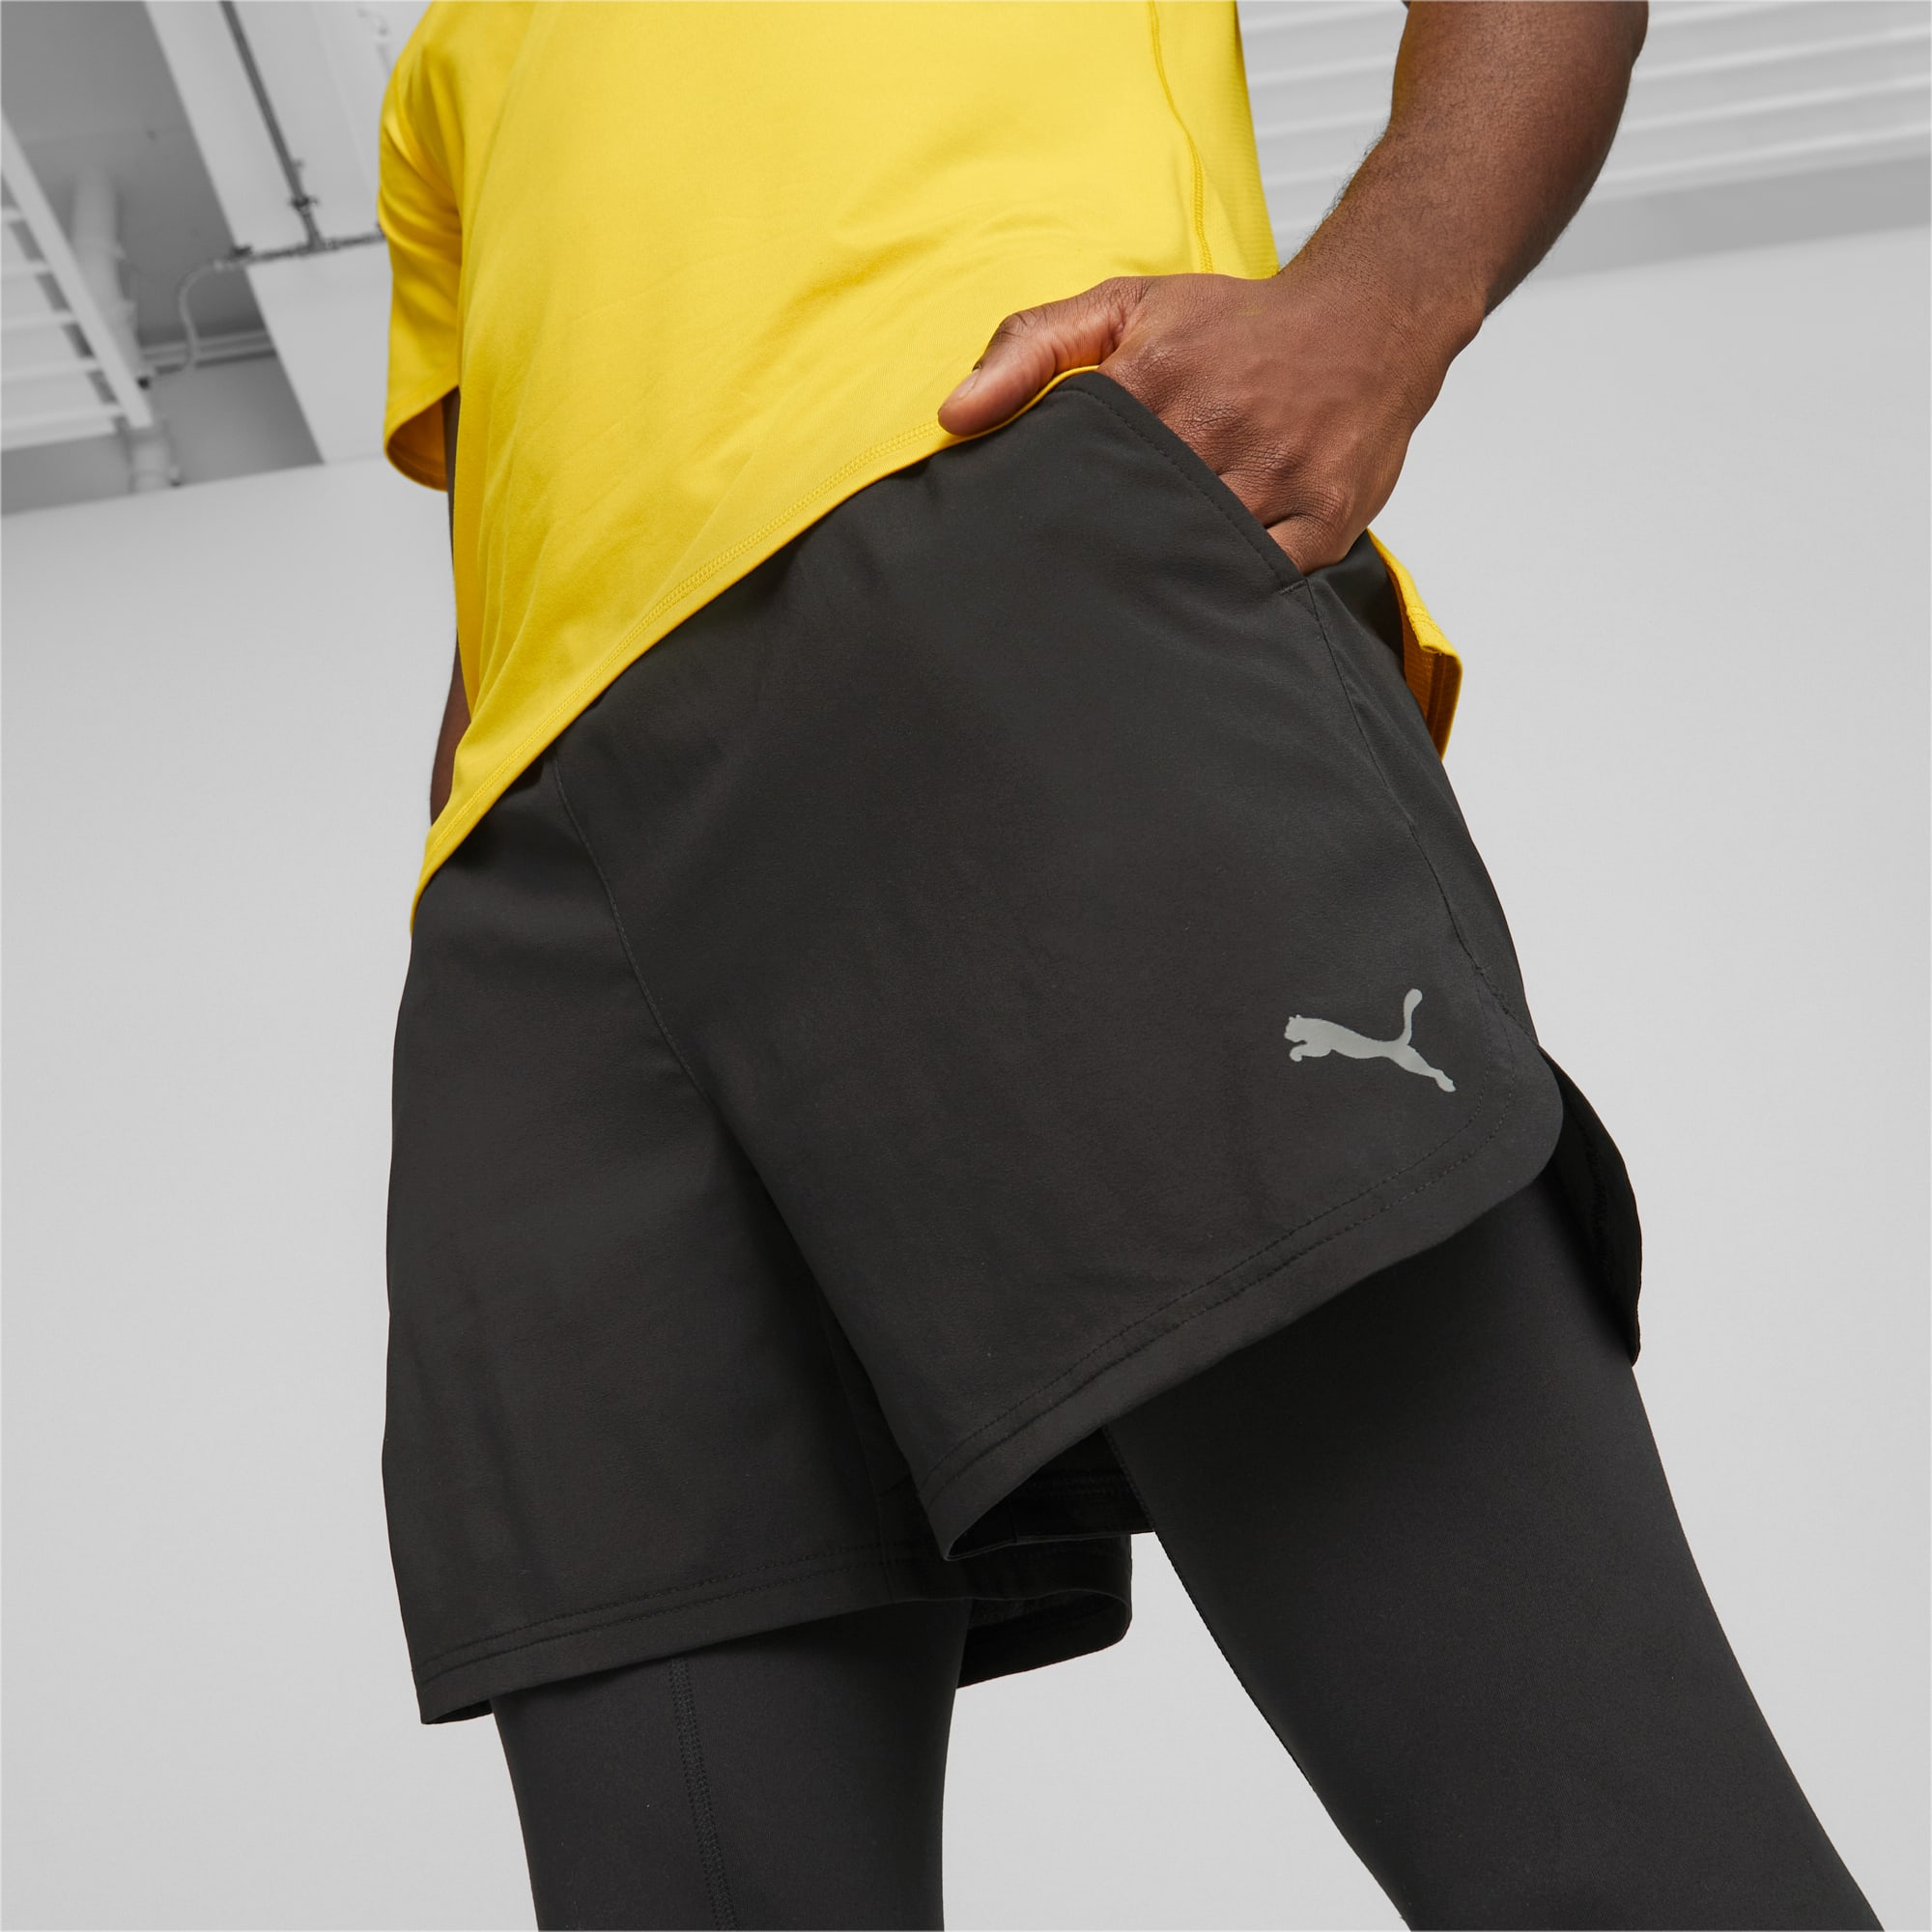 Men's Yellow Athletic & Workout Shorts